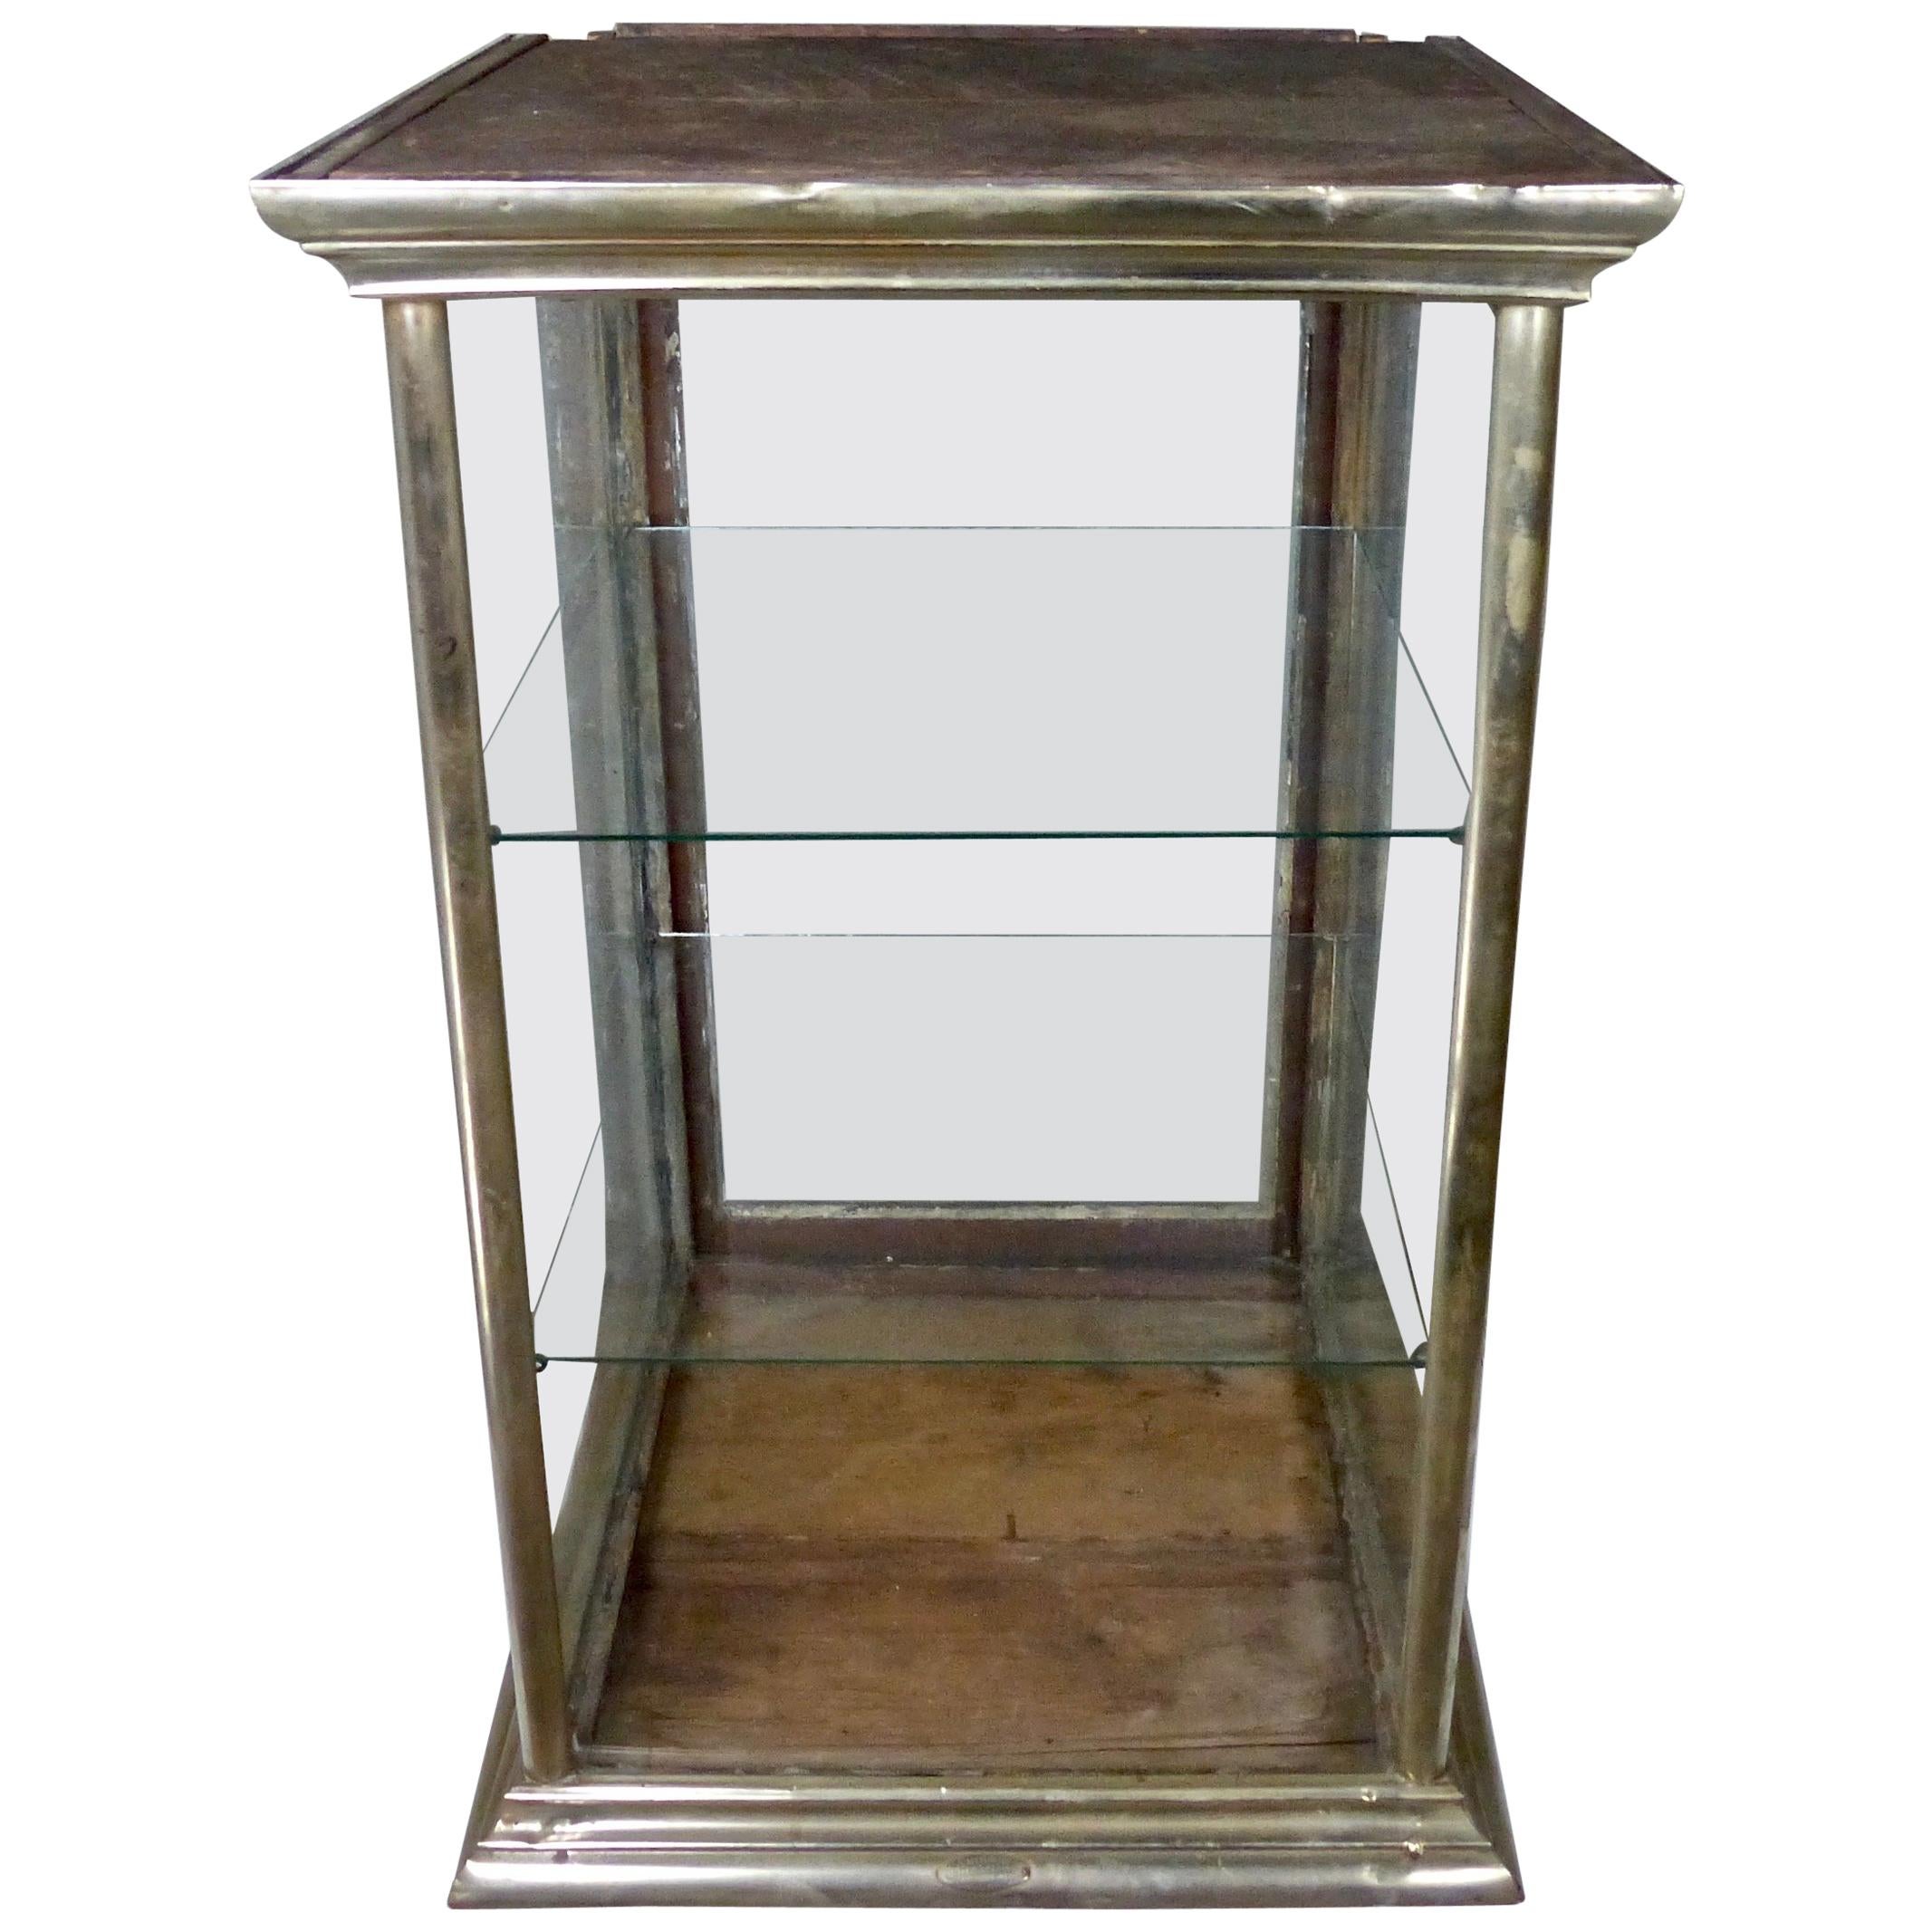 1920 Nickel Plated Brass Mercantile Counter Top Display Case At